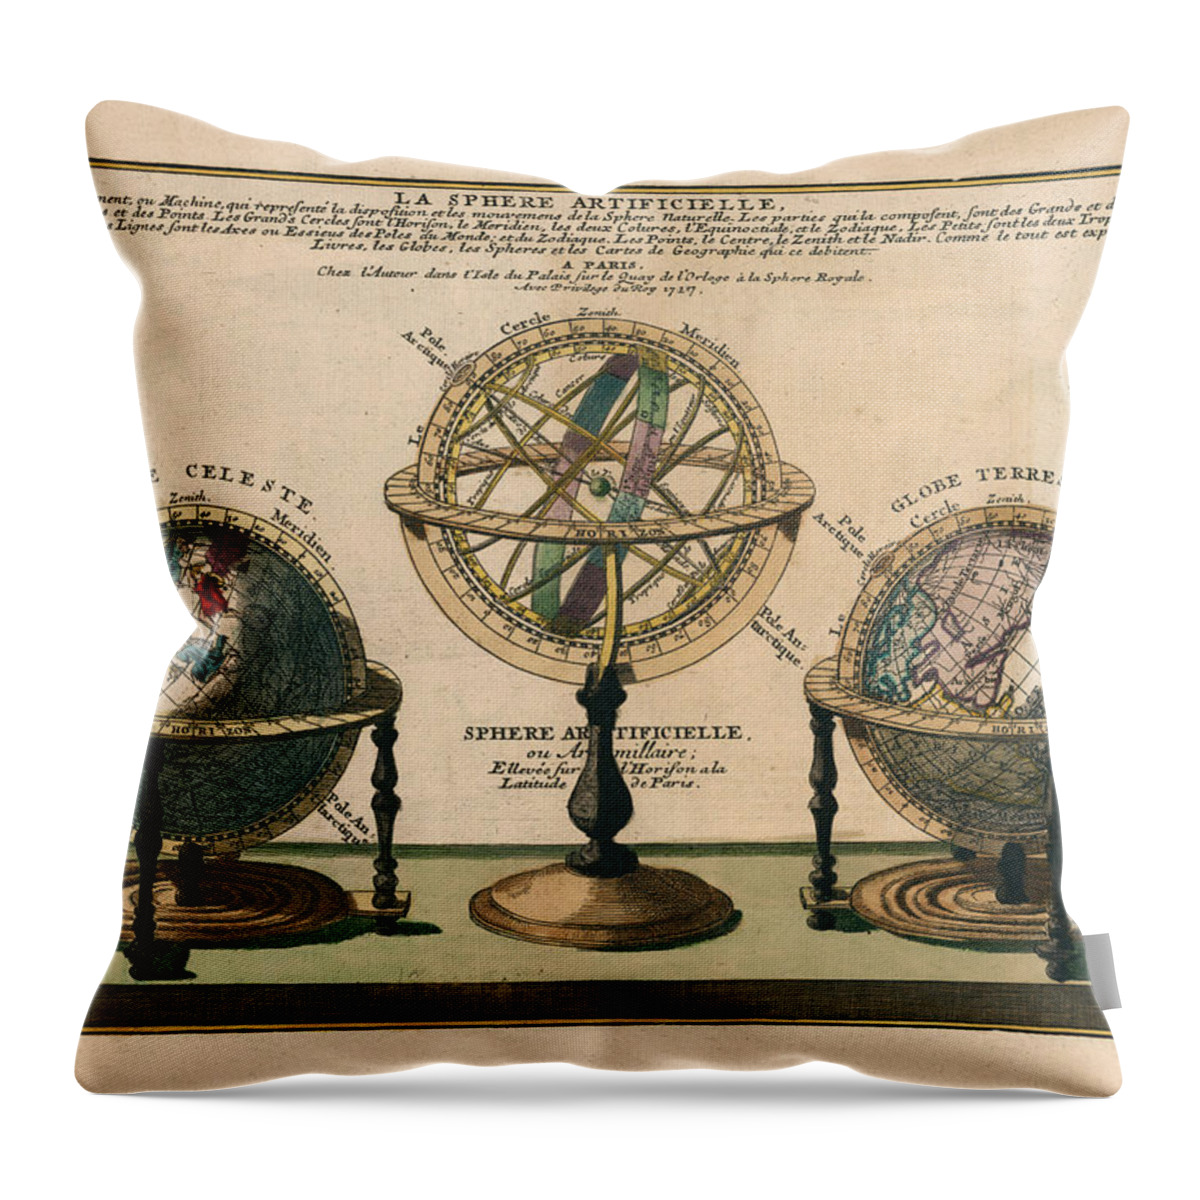 La Sphere Artificielle Throw Pillow featuring the drawing La Sphere Artificielle - Illustration of the Globe - Celestial and Terrestrial Globes - Astrolabe by Studio Grafiikka